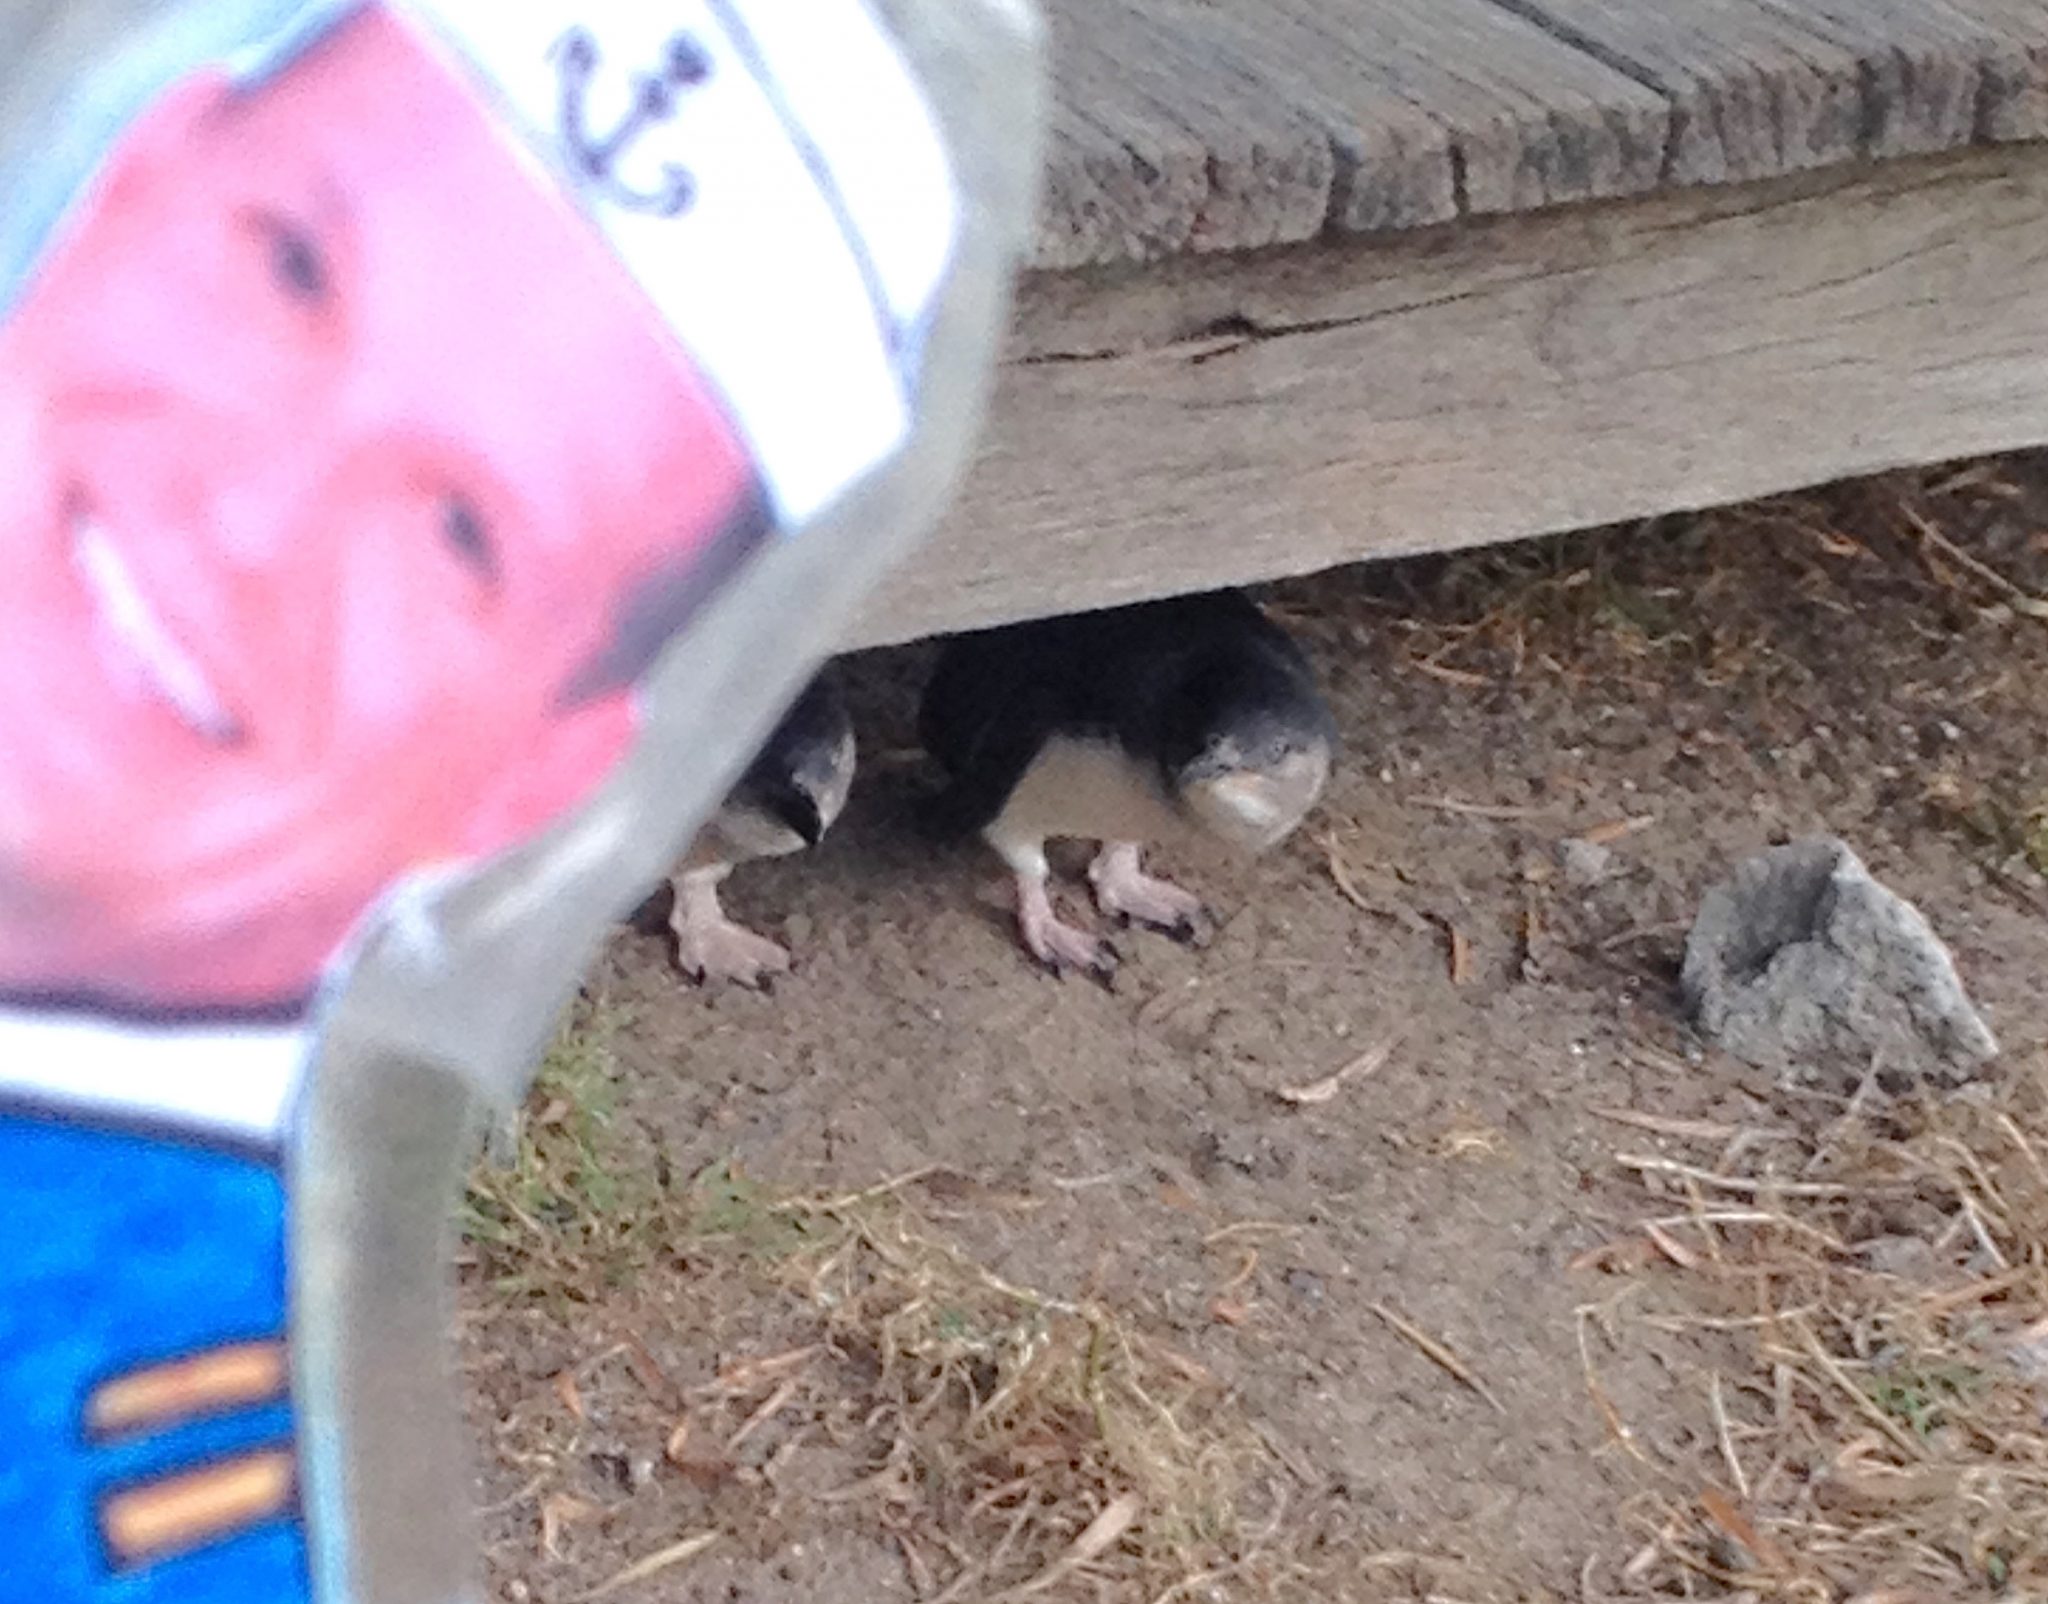 154. On the way to the beach, Flat Mr. Davis saw two baby Little Penguins under a boardwalk awaiting their parents to feed them on the Southwest coast of Phillip Island, December 2015